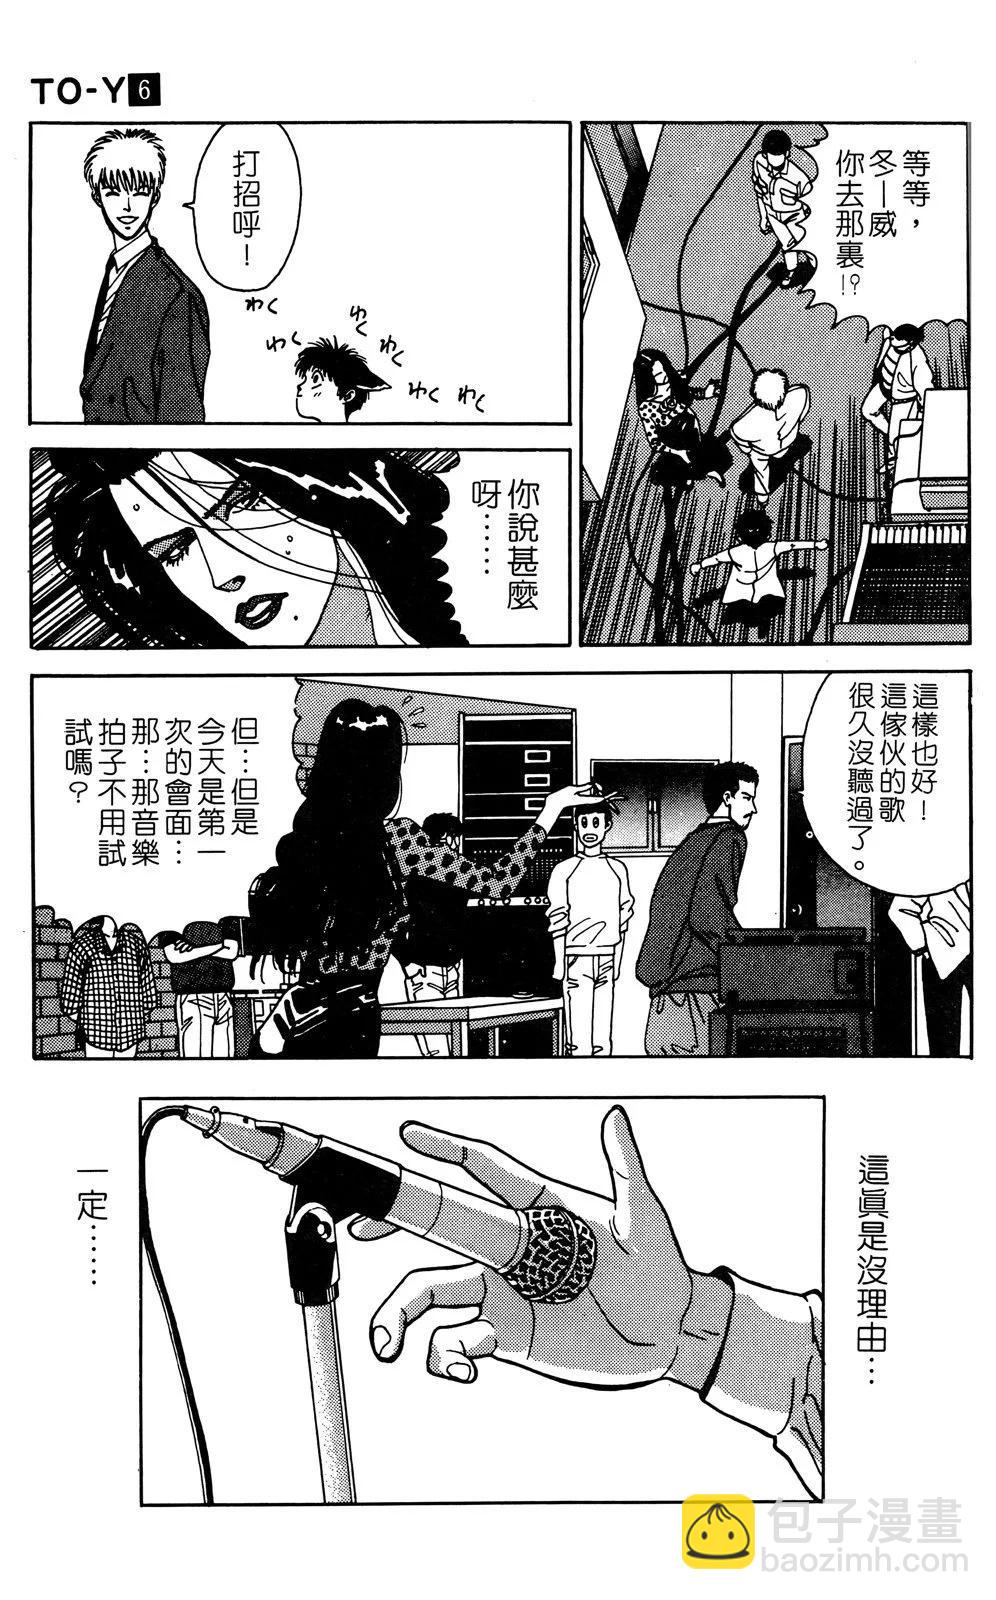 TO-Y - 第06卷(1/4) - 4